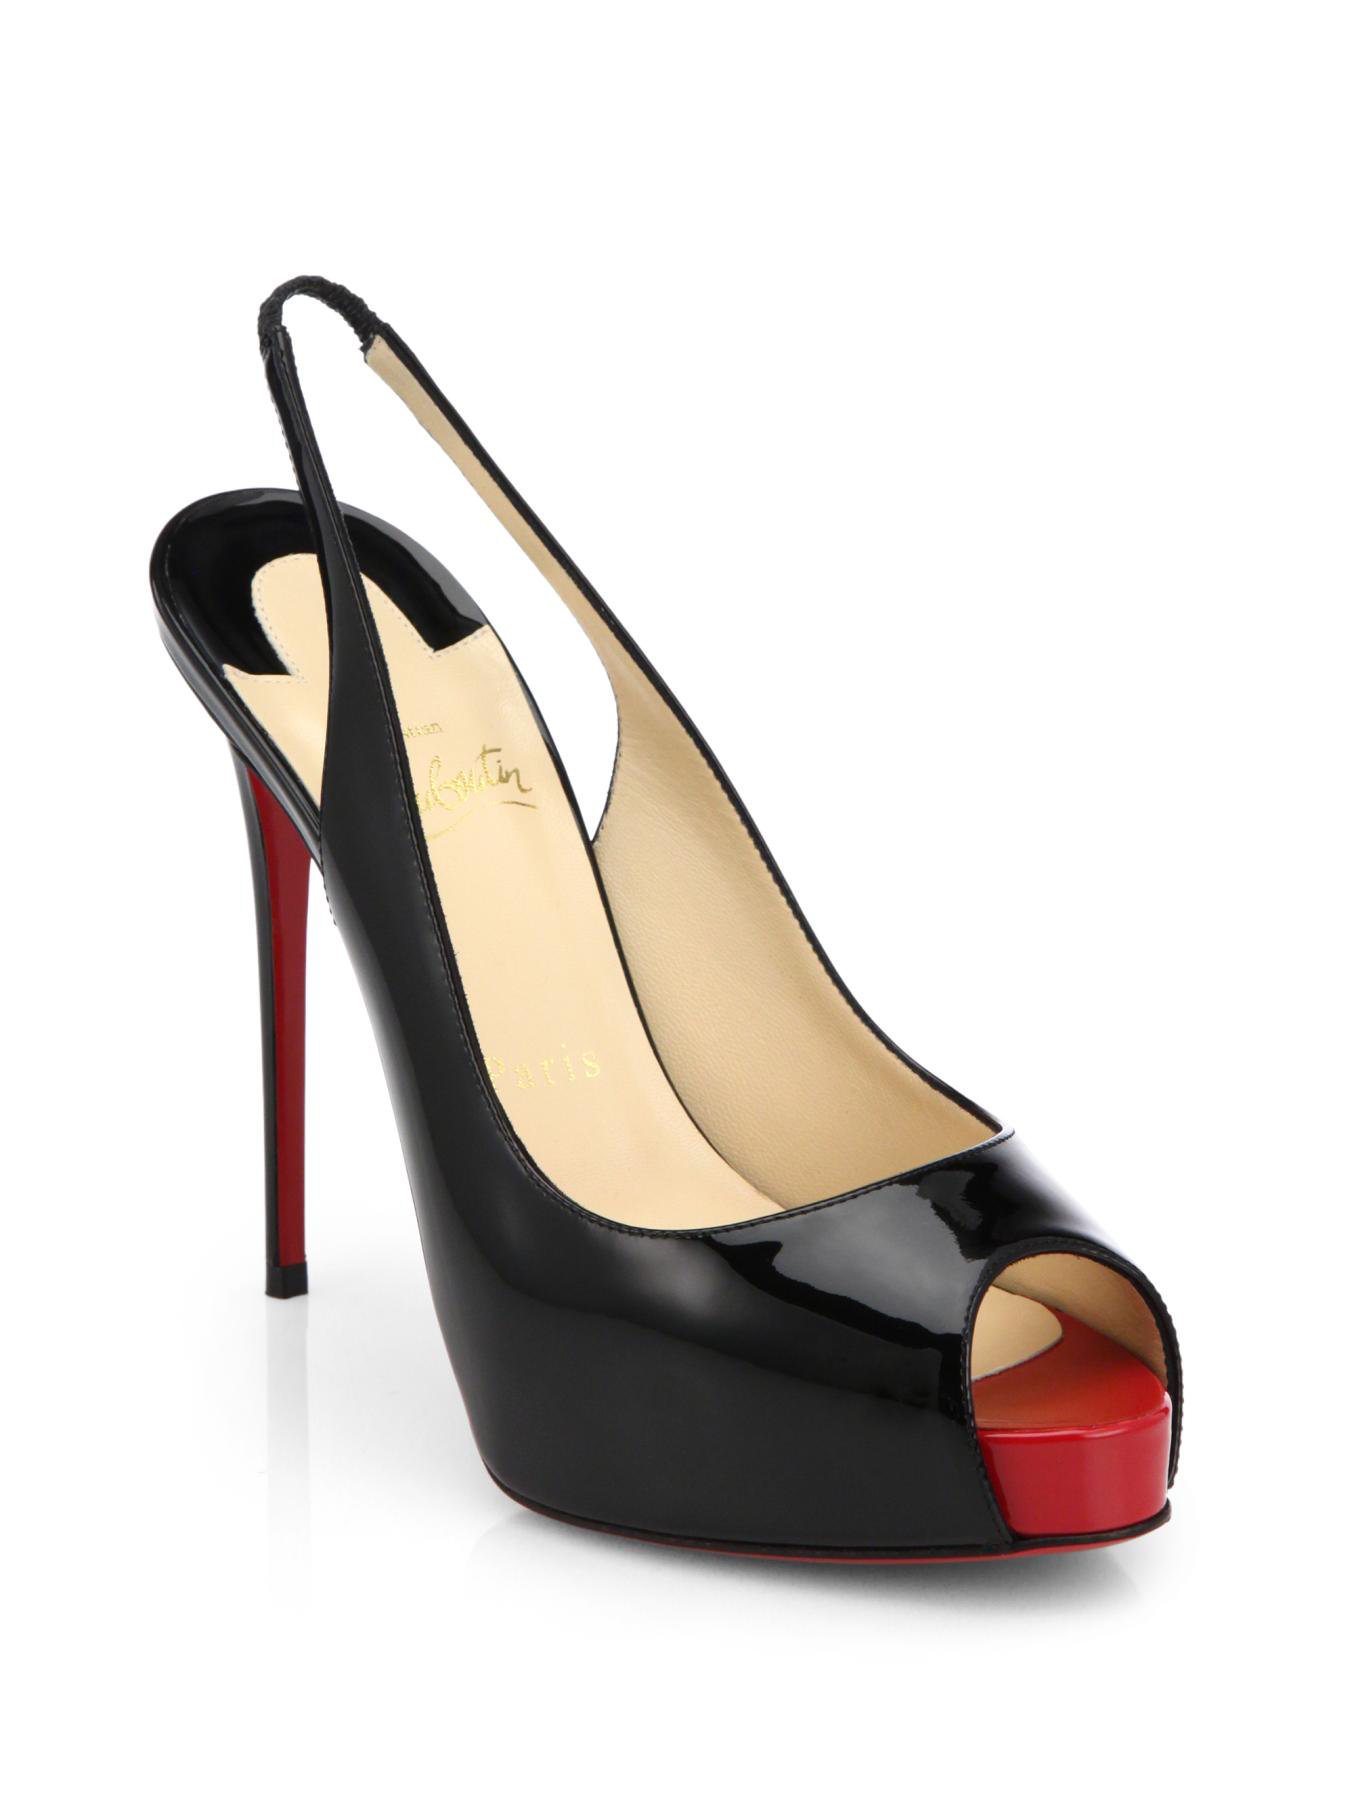 mens spiked loafers cheap - christian louboutin peep-toe patent leather slingback pumps | The ...